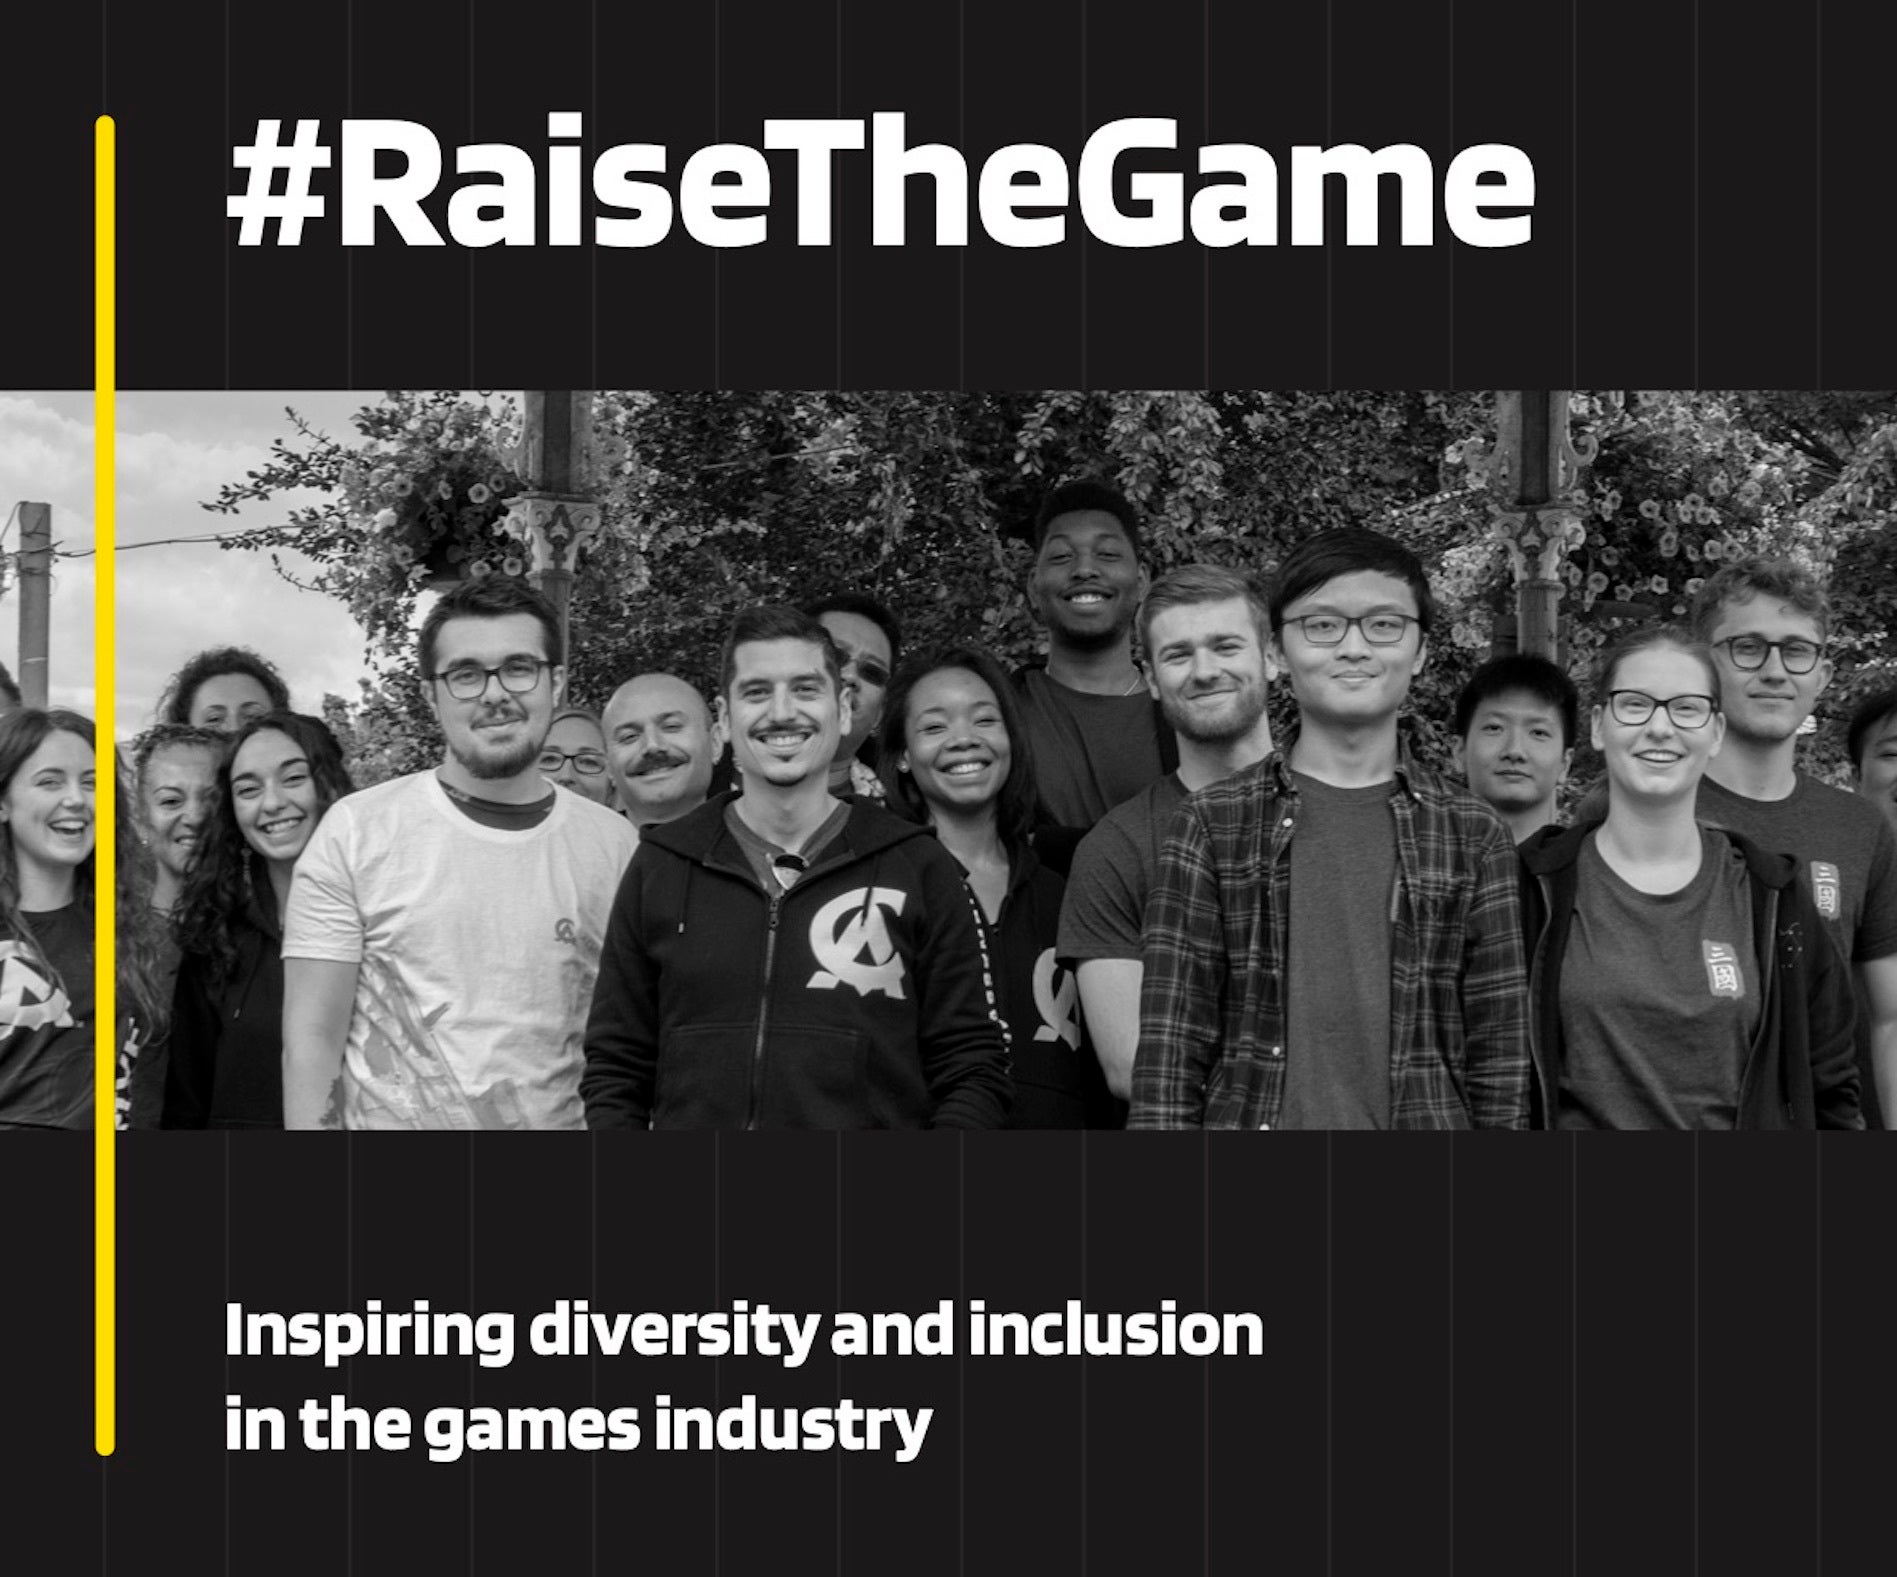 Image for The UK games industry is still overwhelmingly young, white, and male